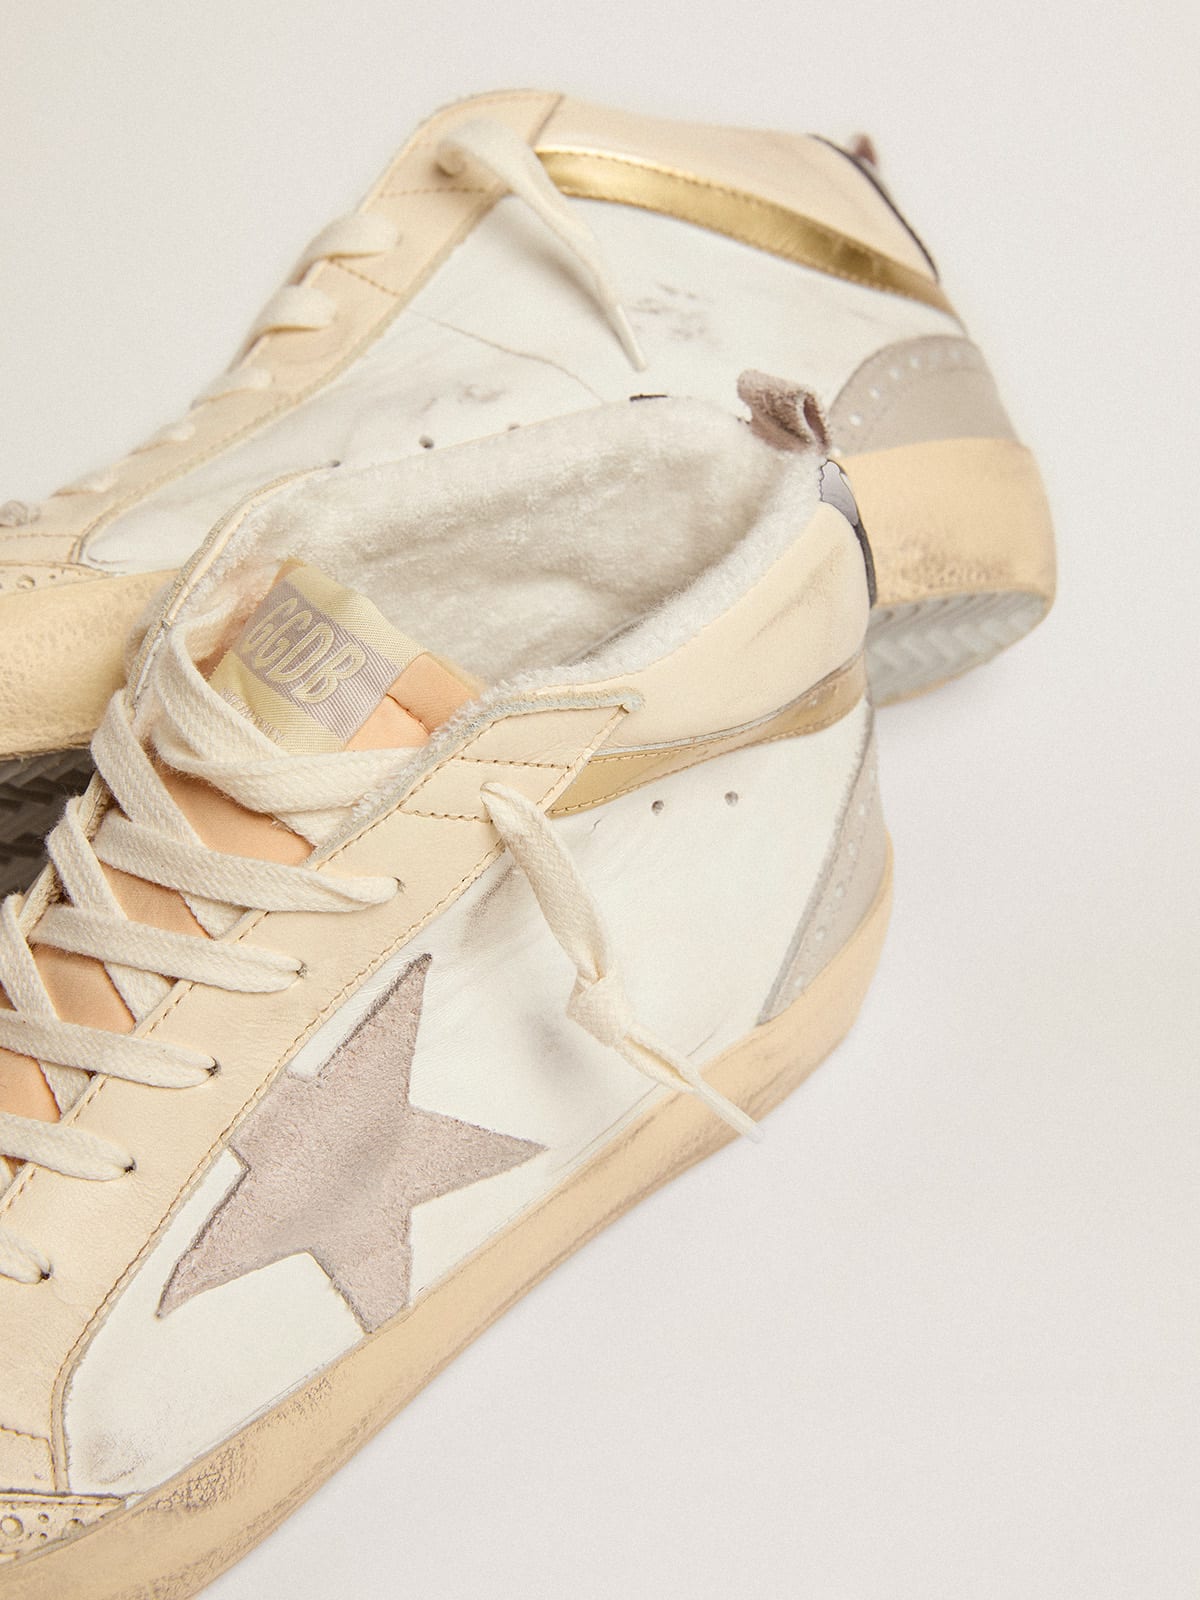 Golden Goose - Mid Star sneakers with light gray suede star and chrome-effect gold leather flash in 